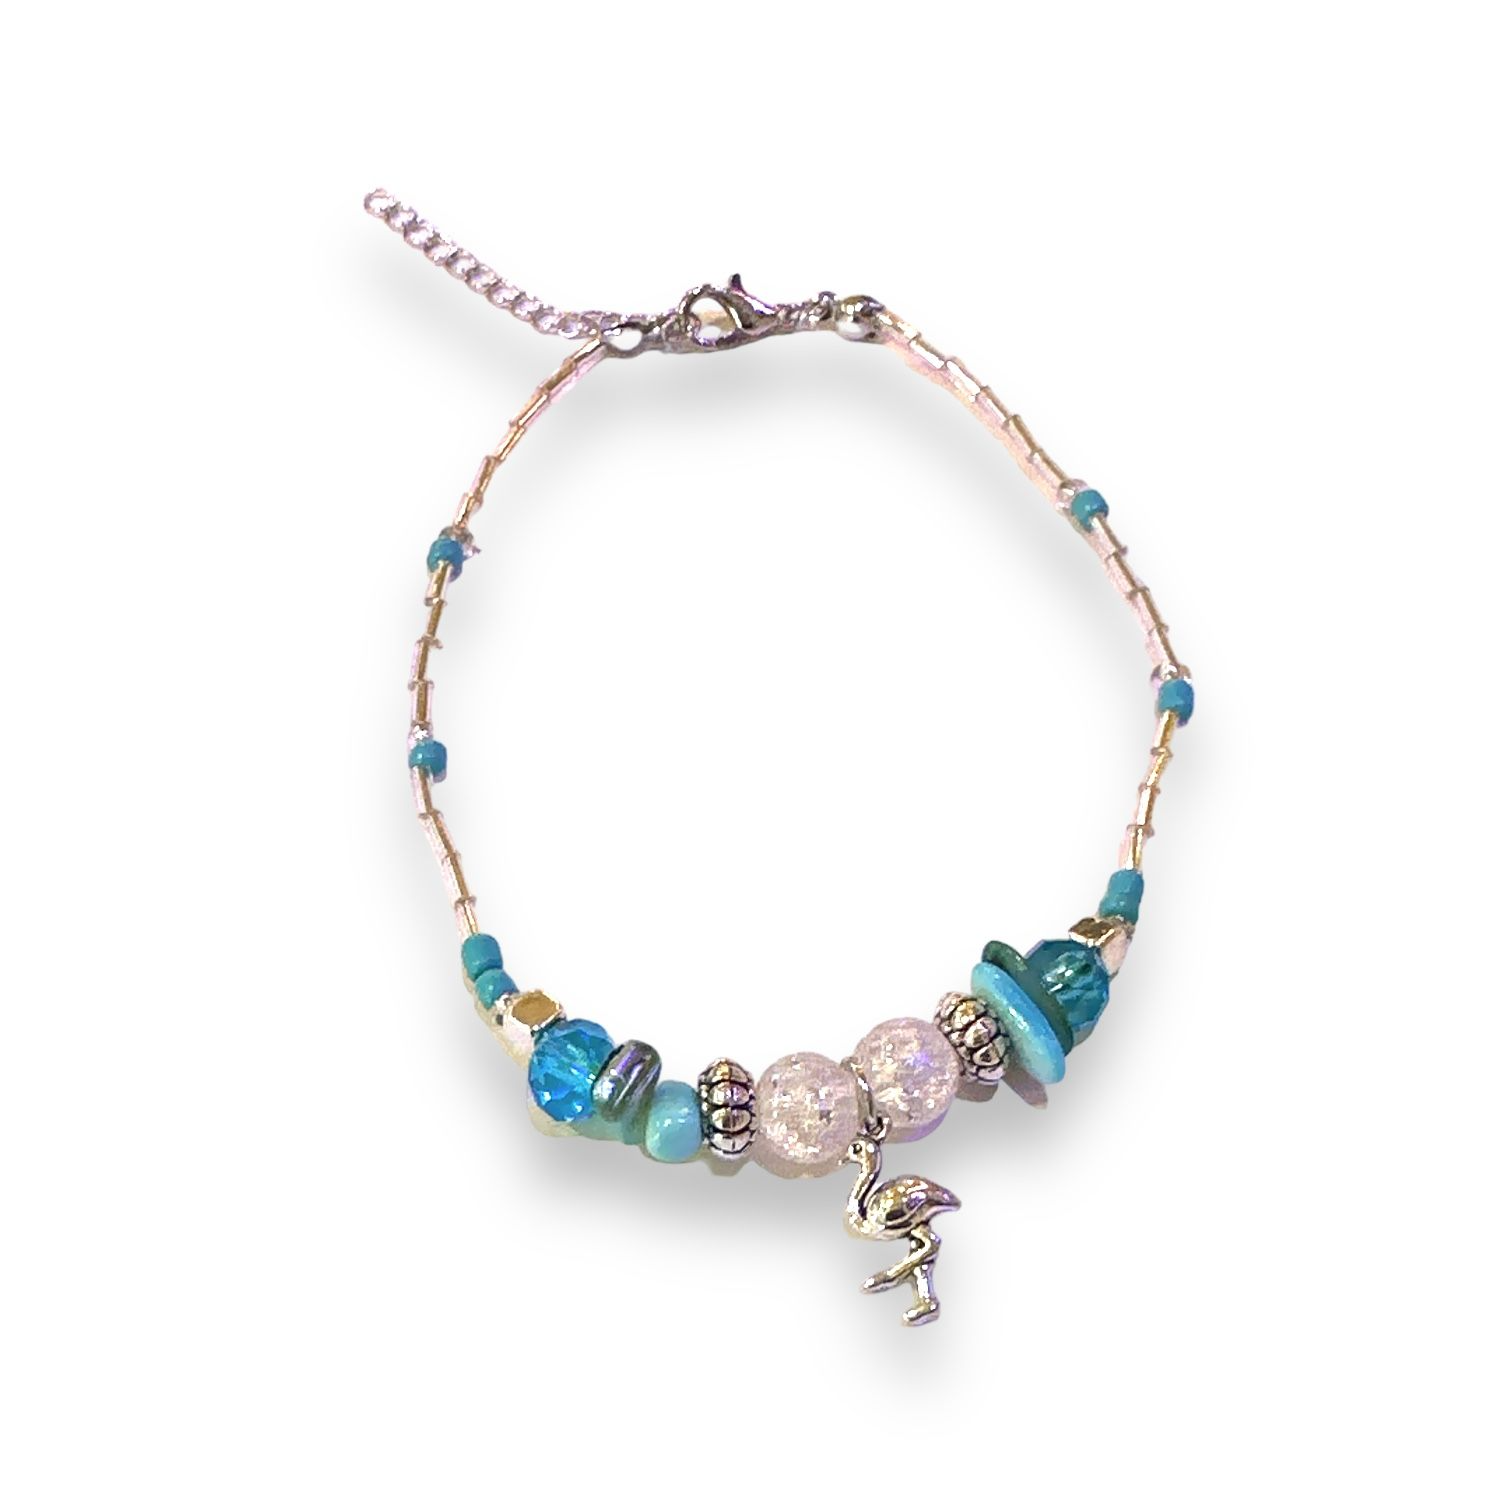 Flamingo Charmed Liquid Silver Anklet - Silver/Turquoise - Mellow Monkey